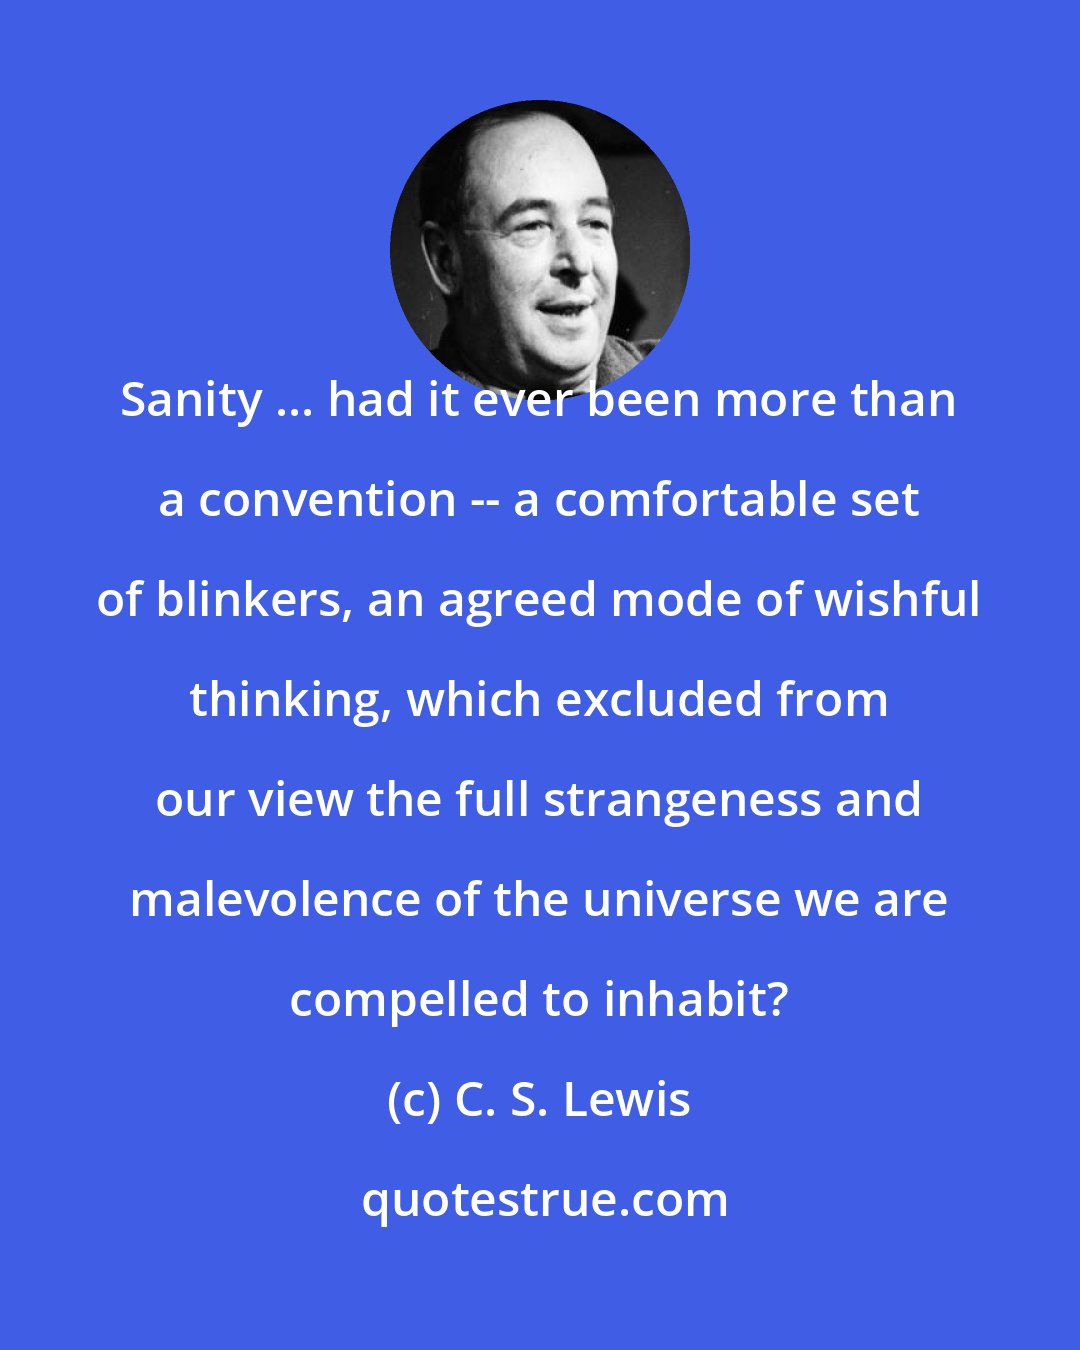 C. S. Lewis: Sanity ... had it ever been more than a convention -- a comfortable set of blinkers, an agreed mode of wishful thinking, which excluded from our view the full strangeness and malevolence of the universe we are compelled to inhabit?